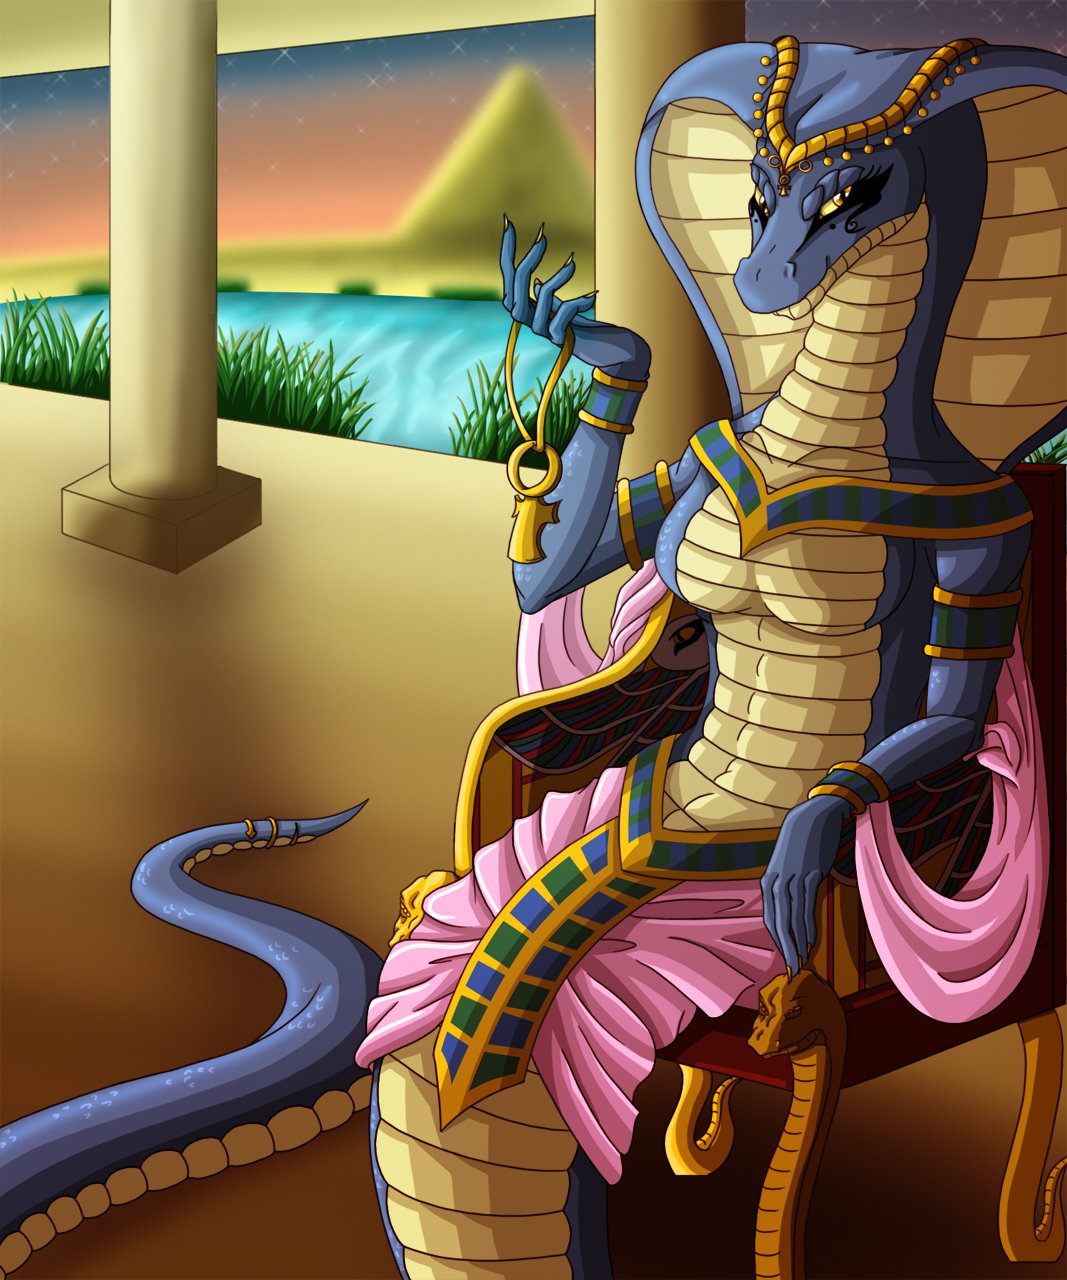 Quality art of a naga and an anthro reptile queen having tea together